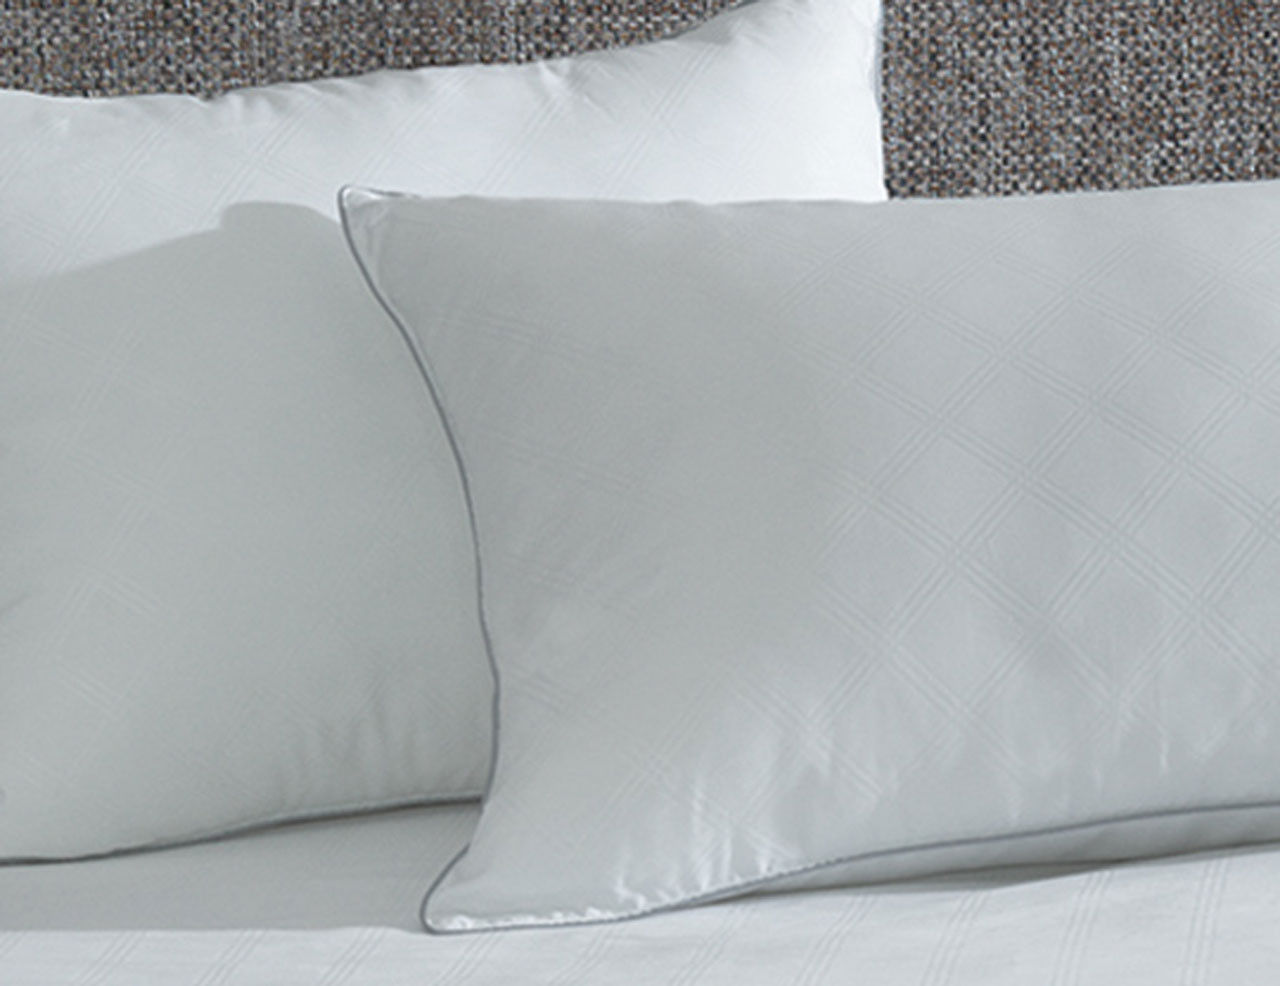 Can these AllerEase Ultimate Professional Pillows be washed?